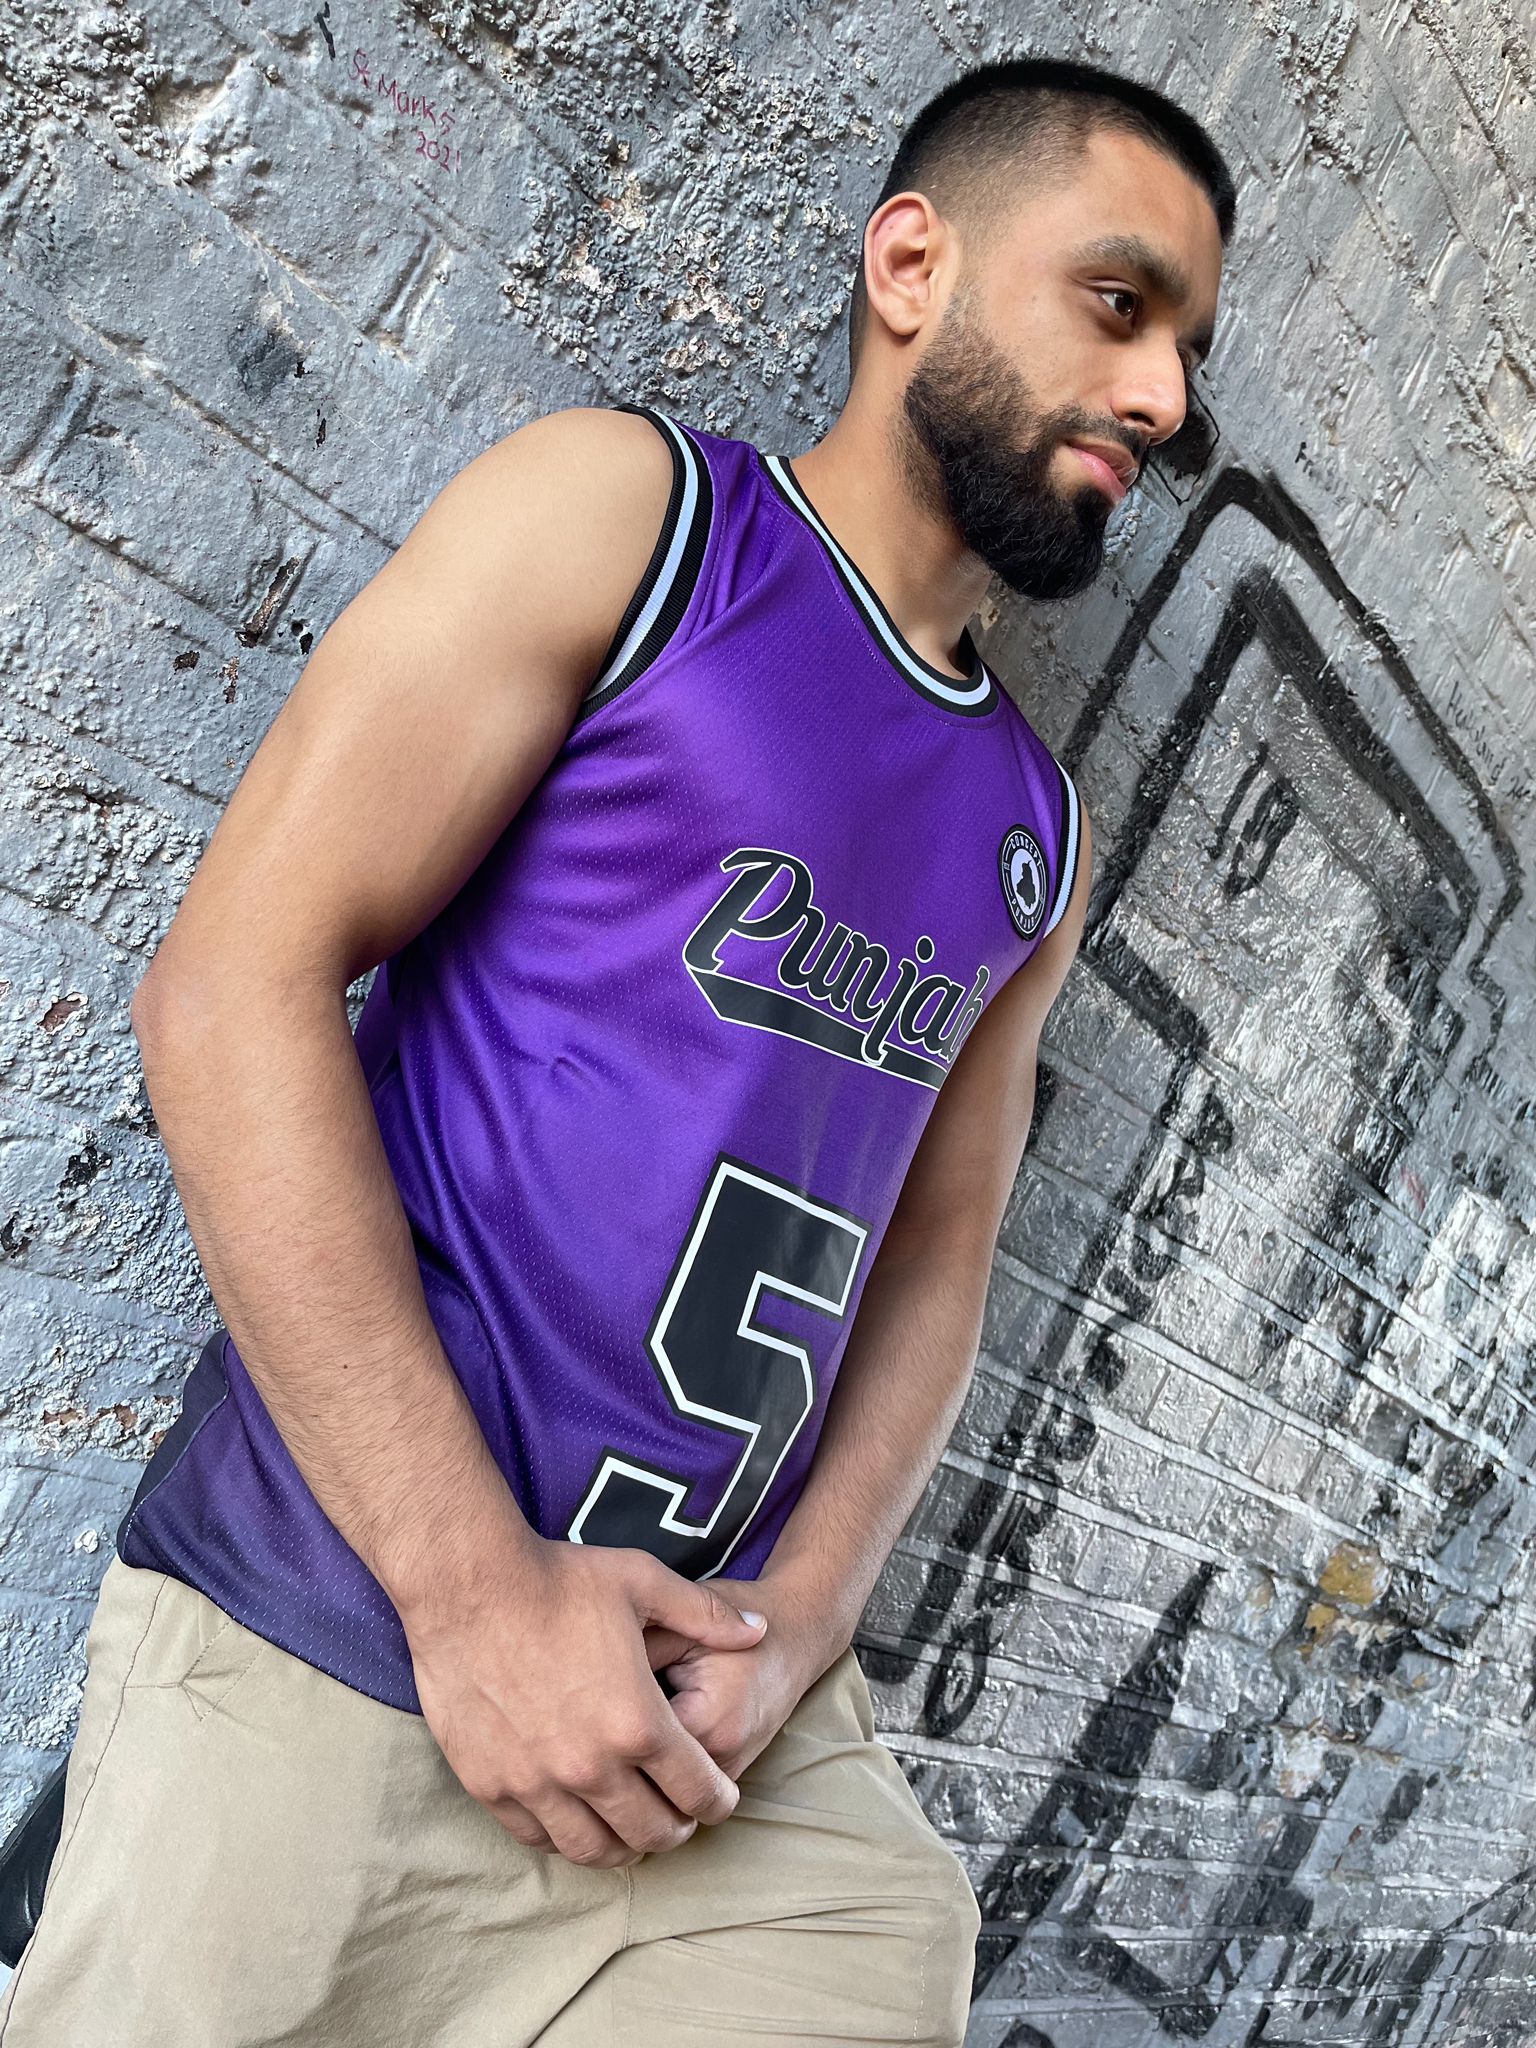 basketball jersey stores